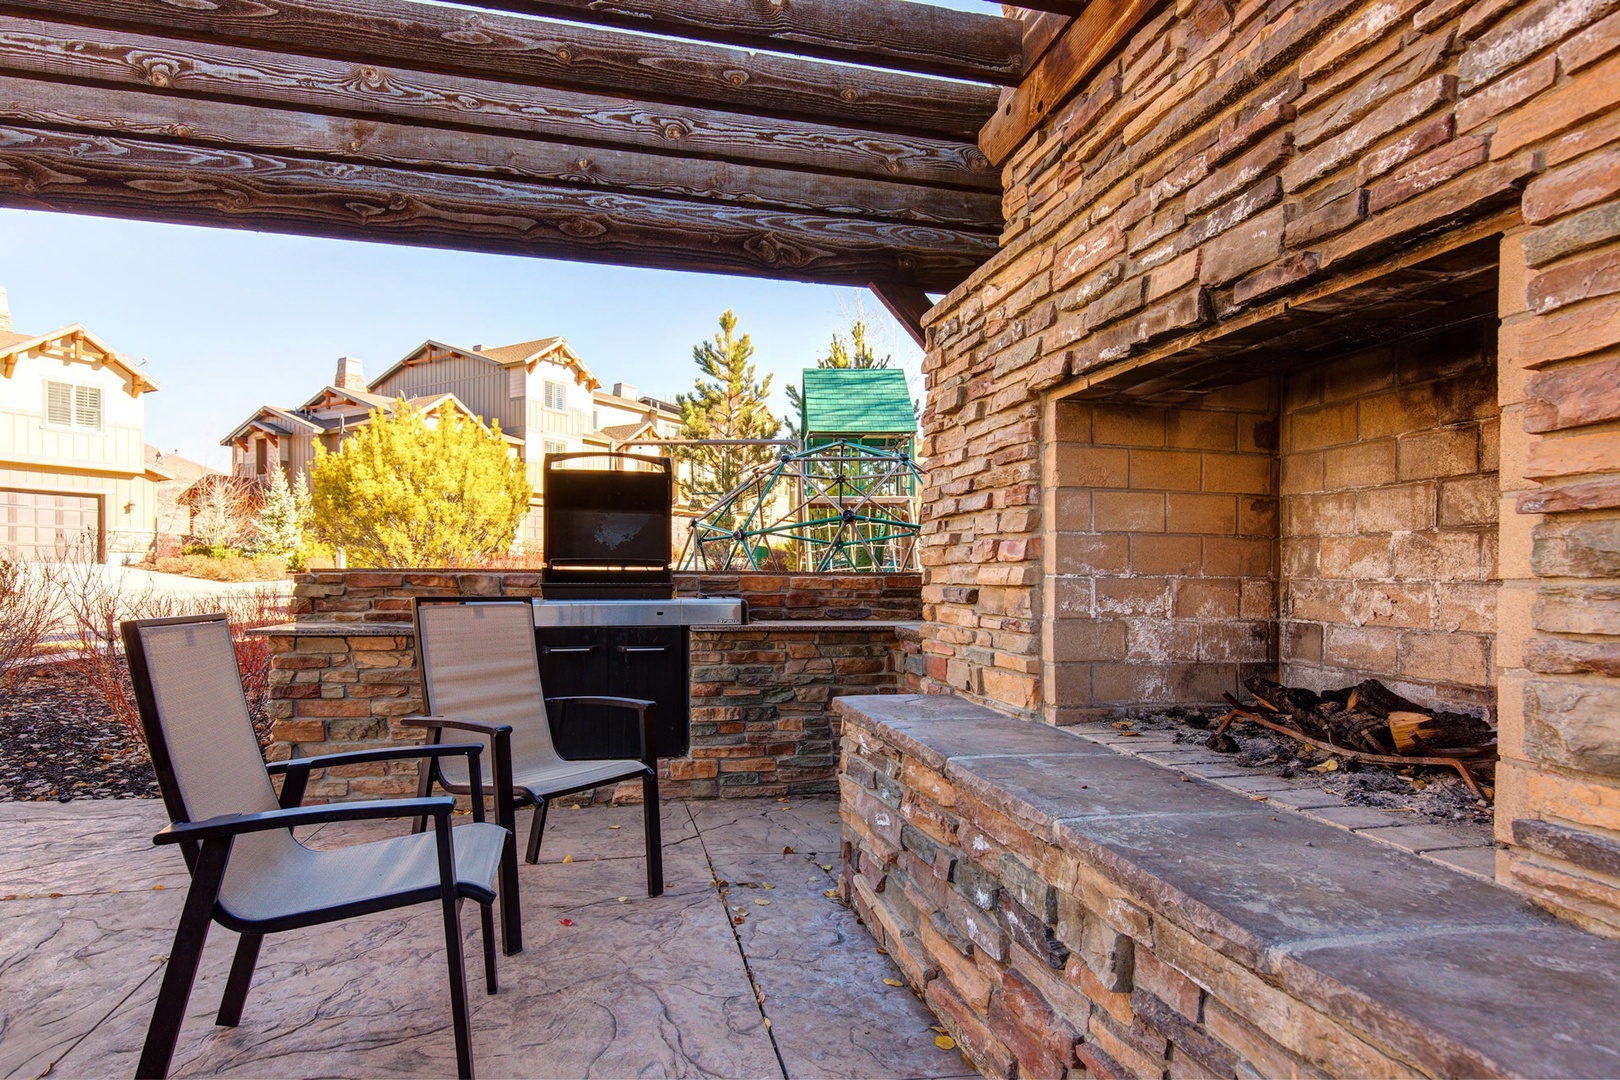 Parks Edge Community Outdoor Wood Burning Fireplace & BBQ Area